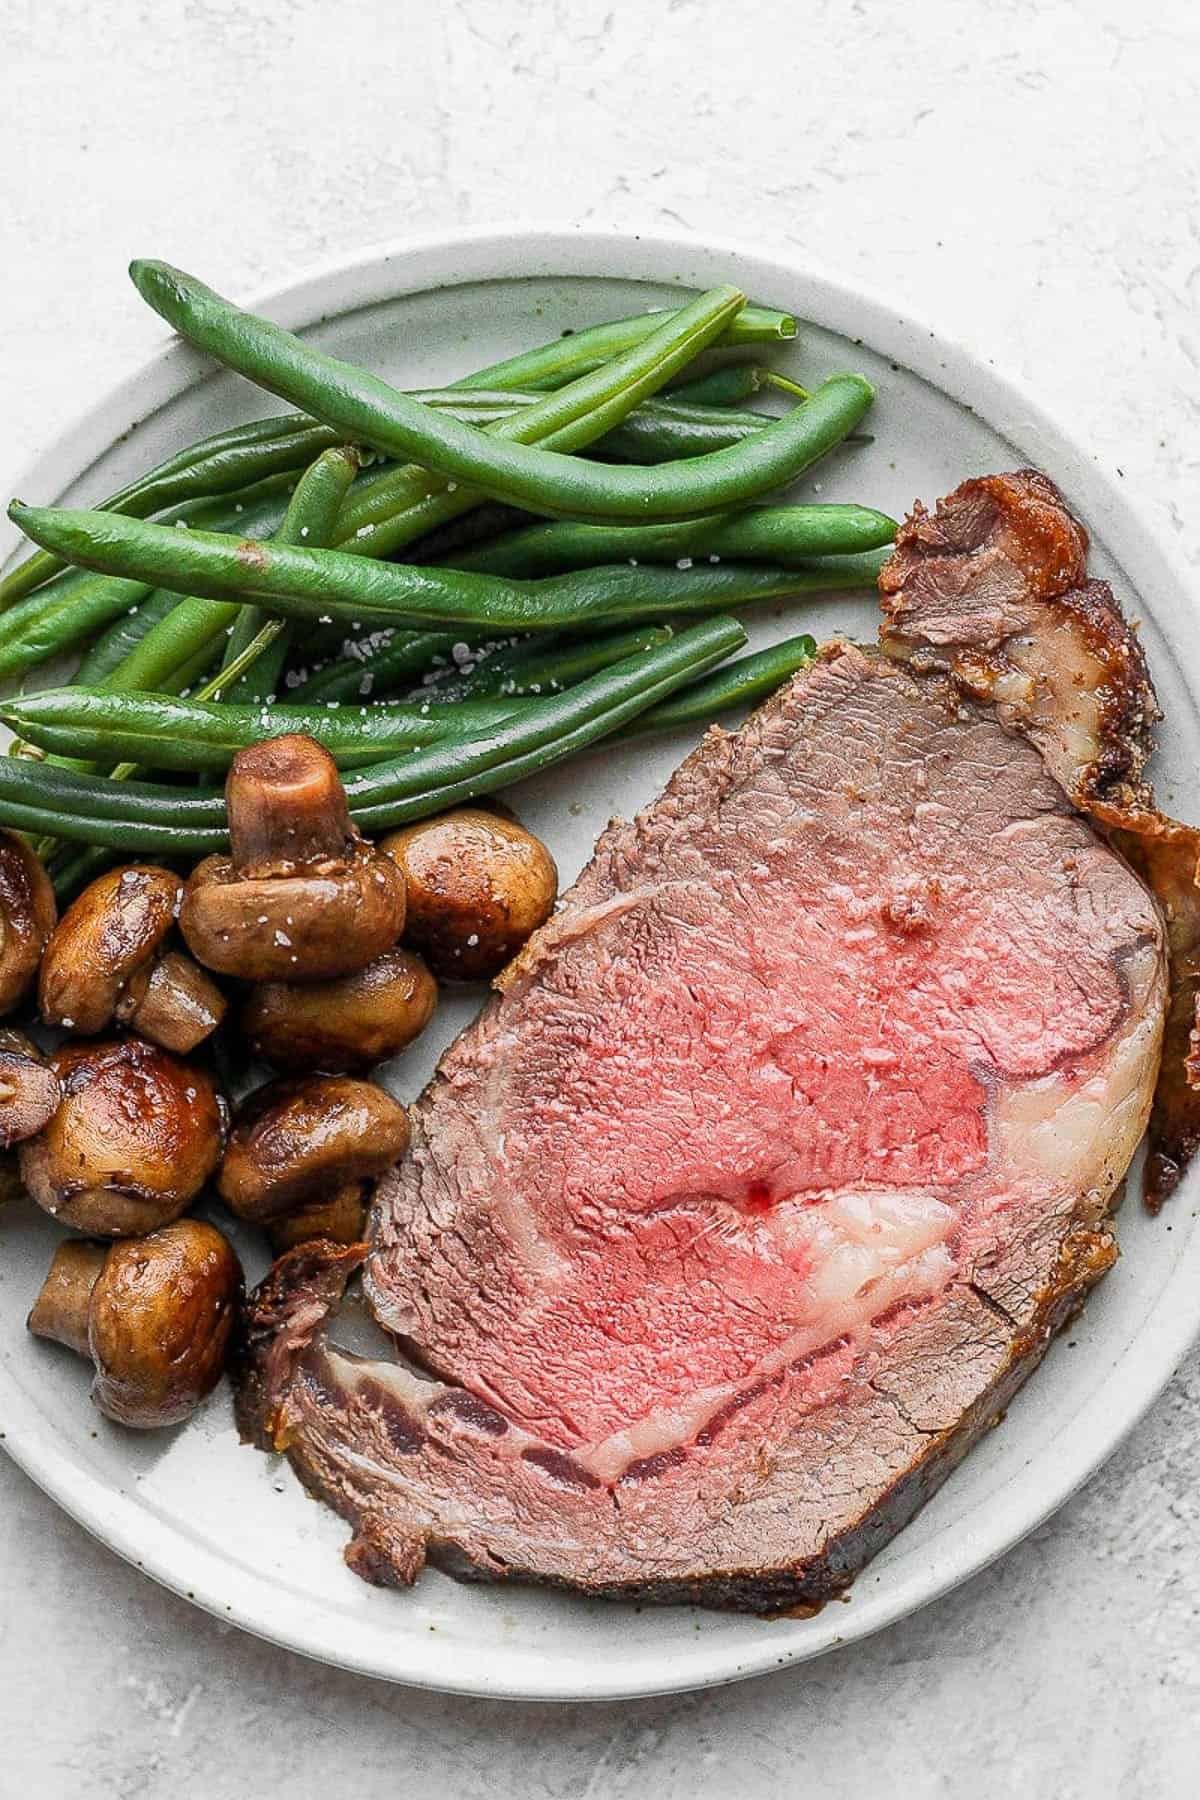 Plate of a slice of prime rib with cooked mushrooms and green beans.